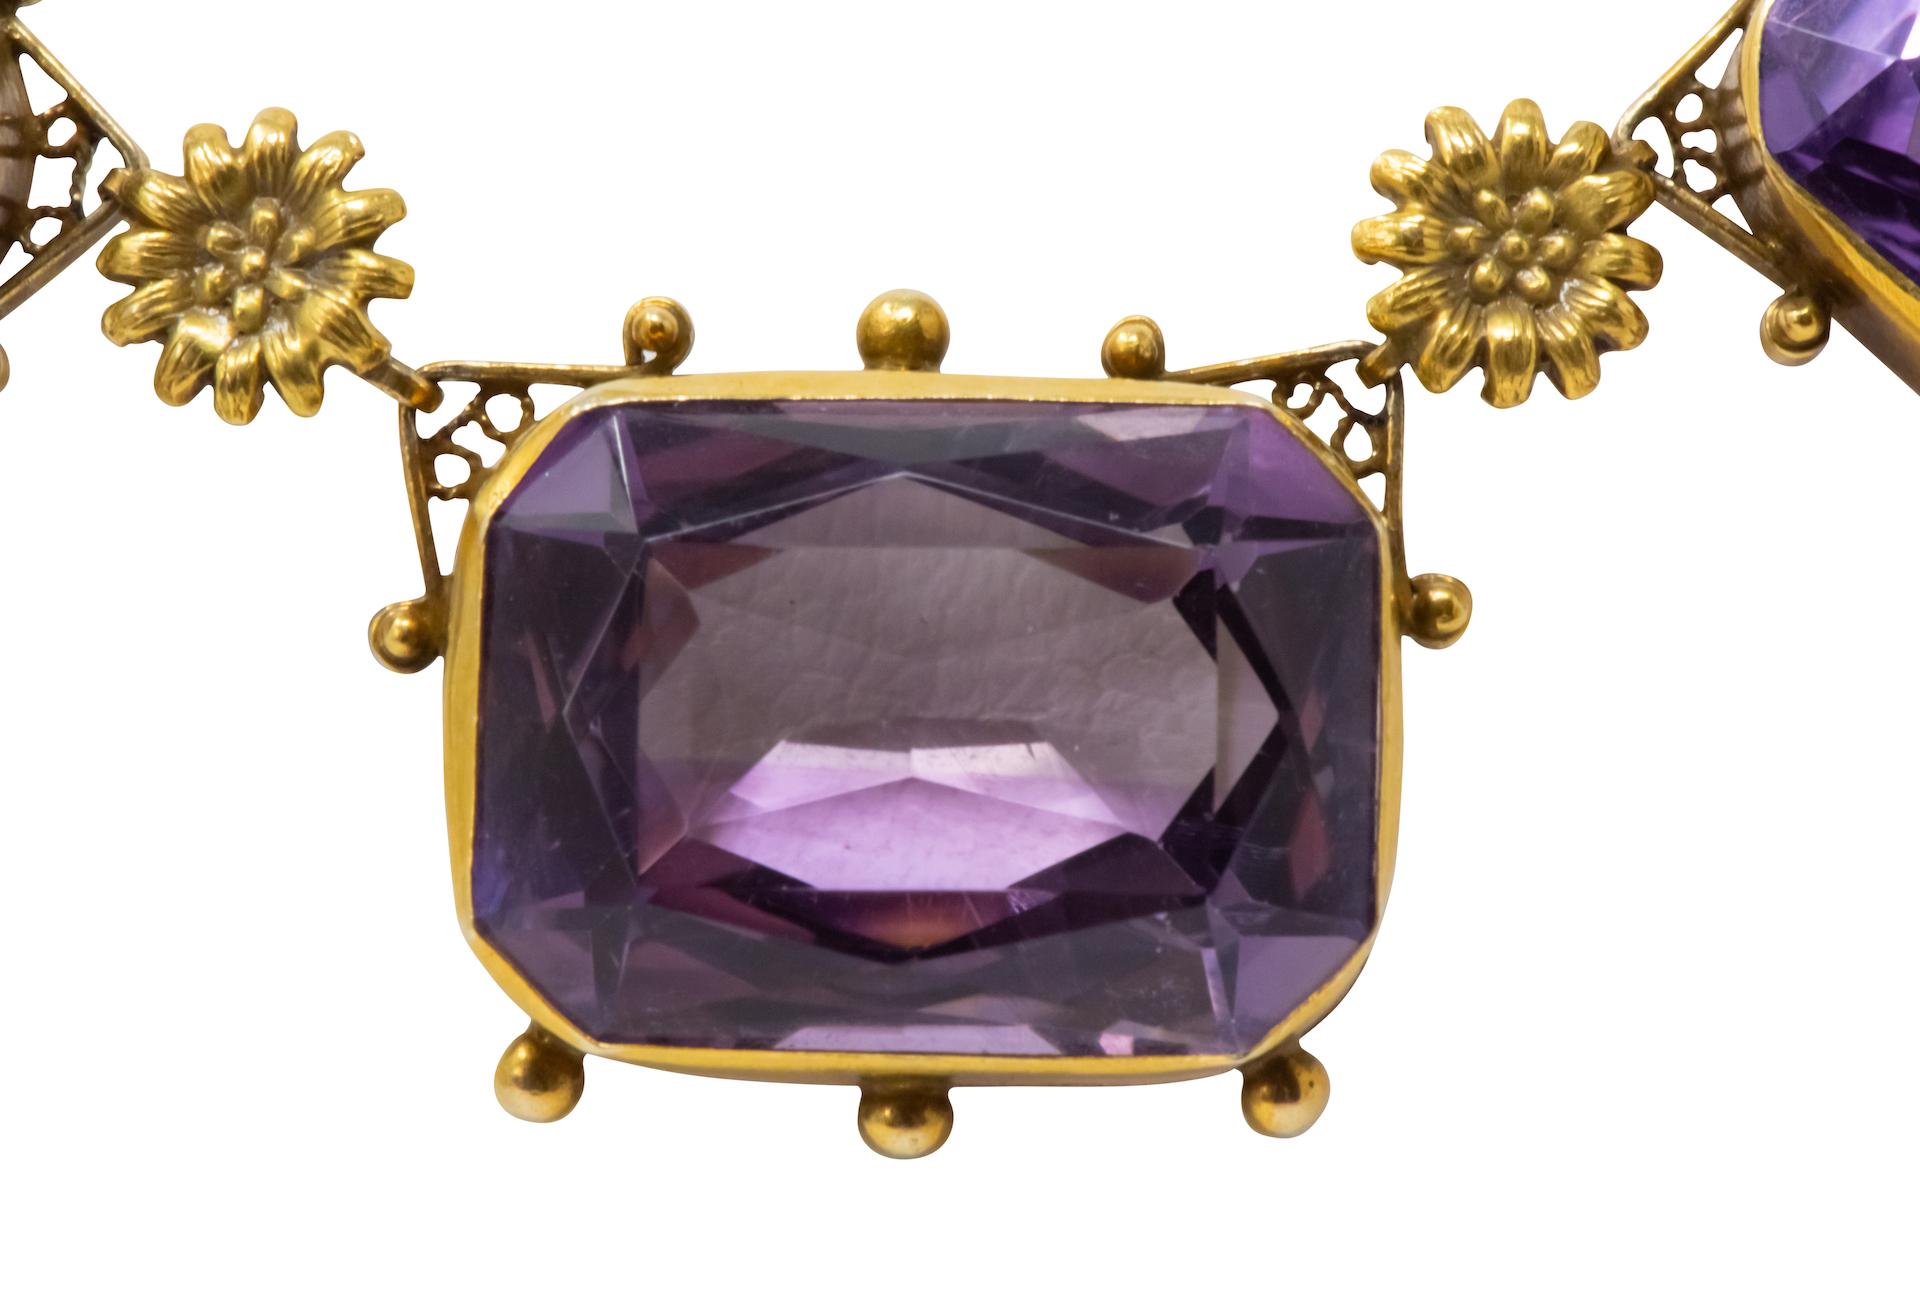 Featuring five rectangular cushion cut amethysts weighing approximately 81.83 carats total, medium light purple color and very well matched

Amethysts are bezel set in delicate gold frames accented by gold flower links and gold bead detail

With